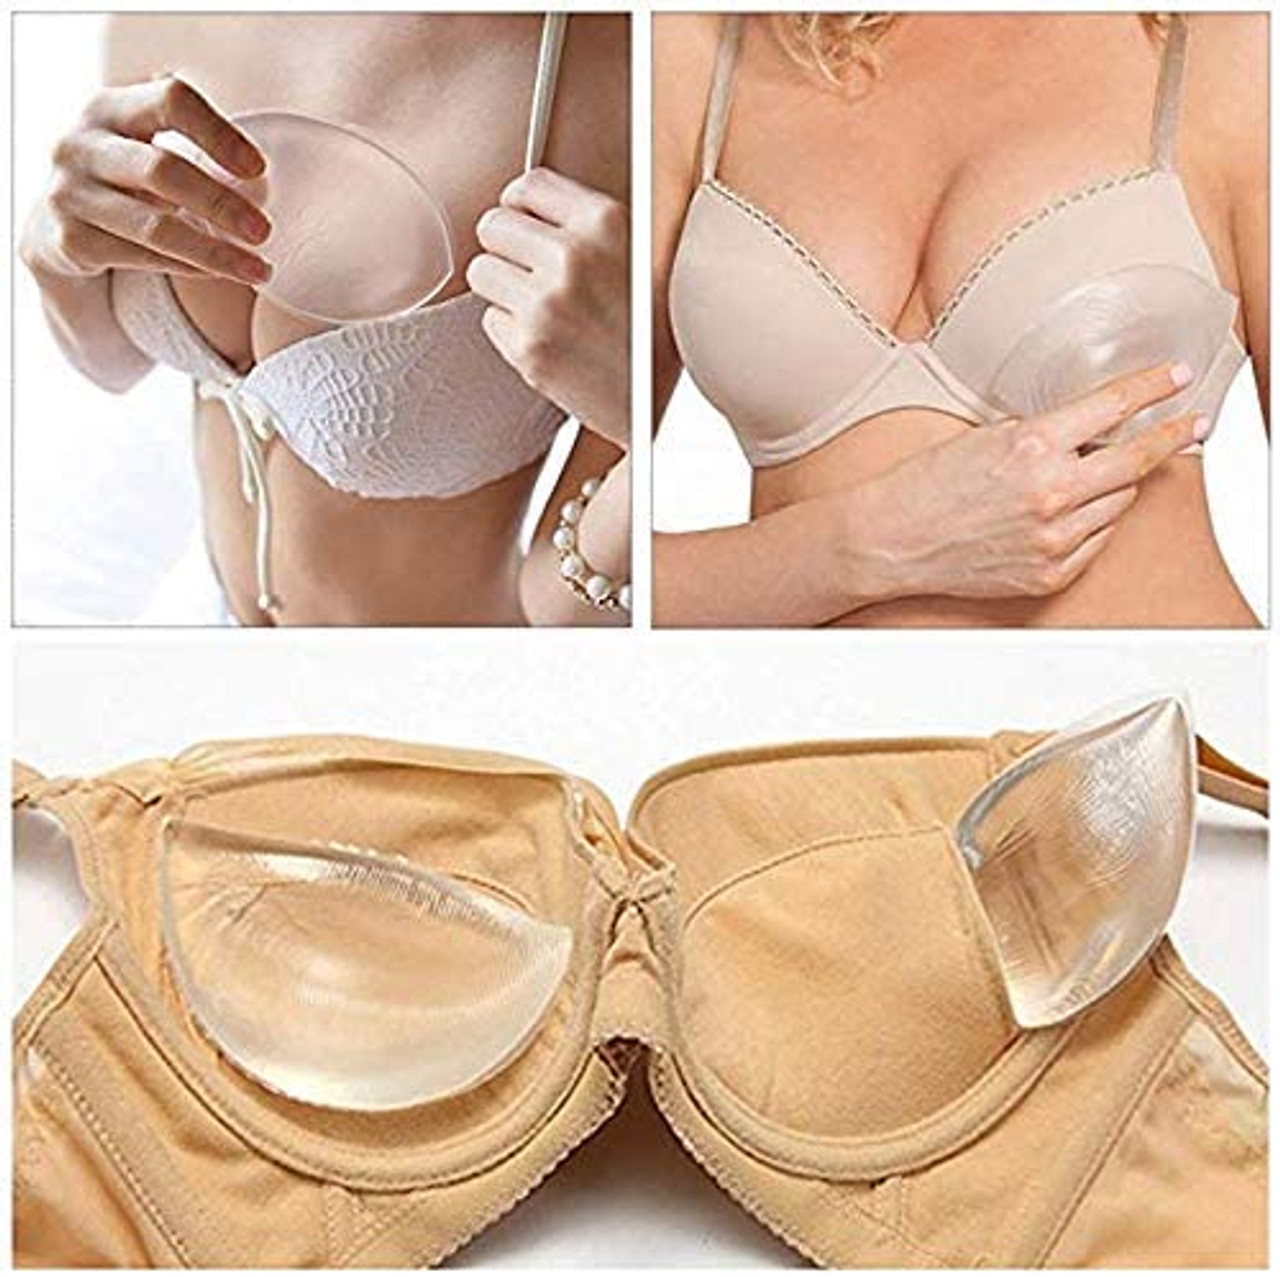 Silicone Cleavage Enhancer Breast Pushup Pad Bra Insert